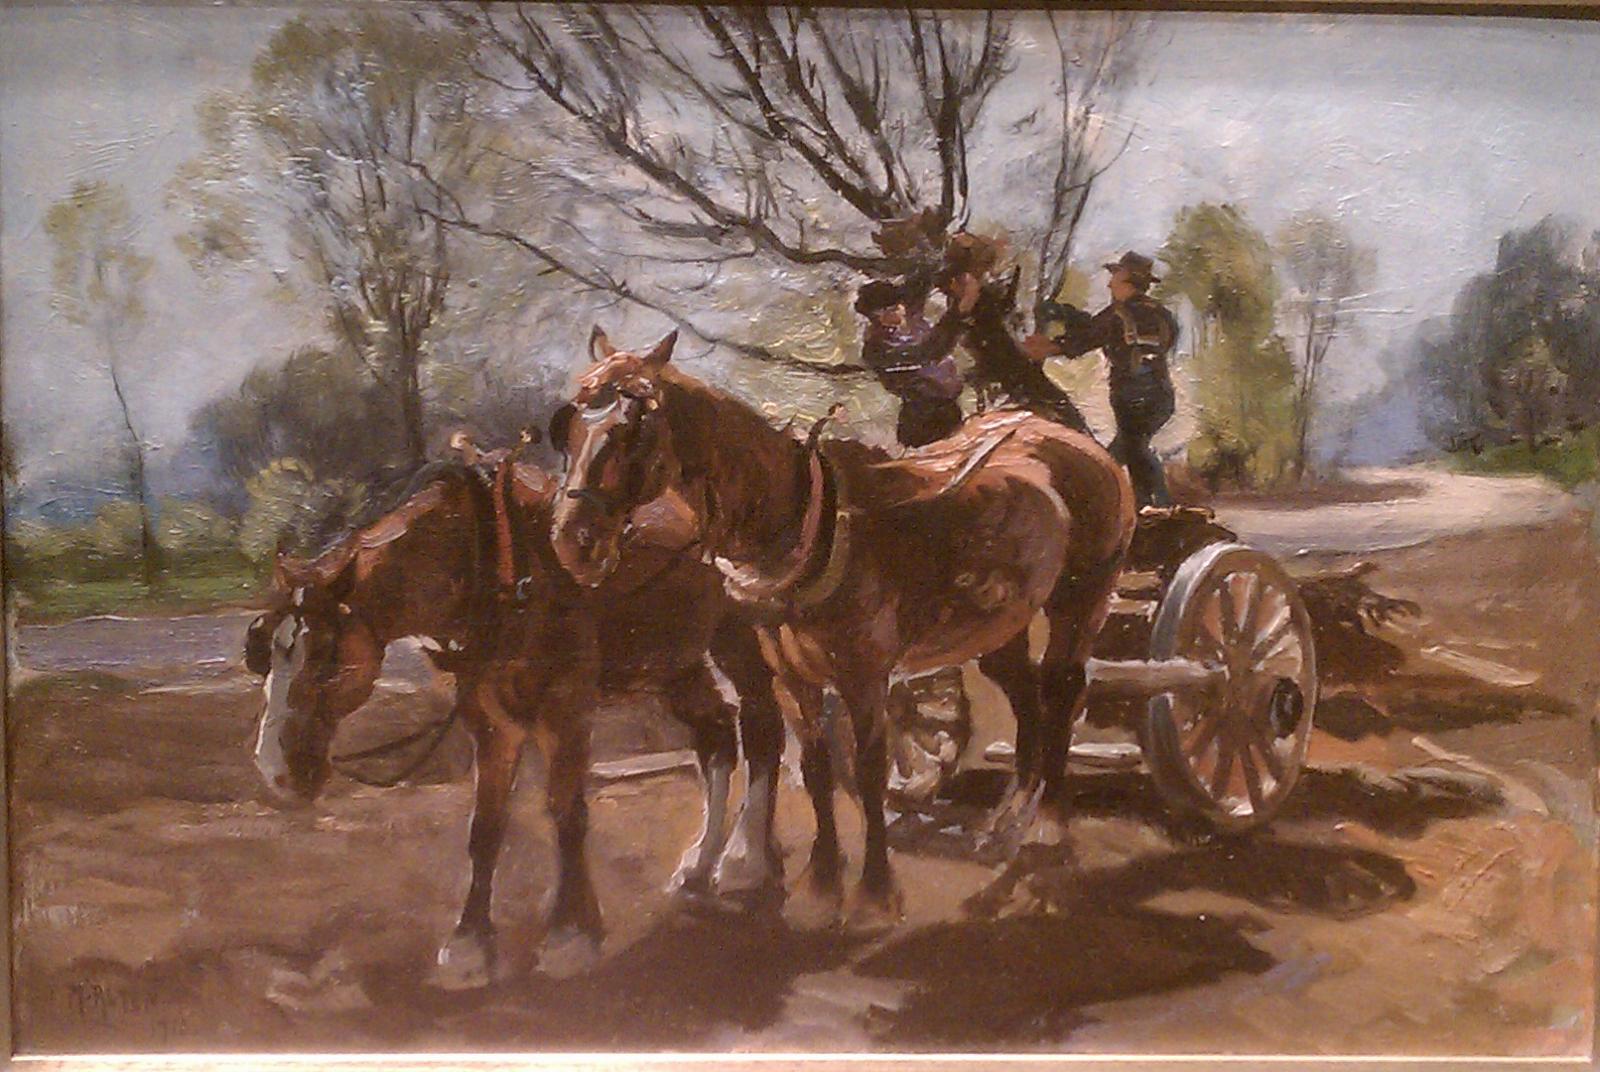 Two horses attached to a cart with two men pulling a tree into the cart.